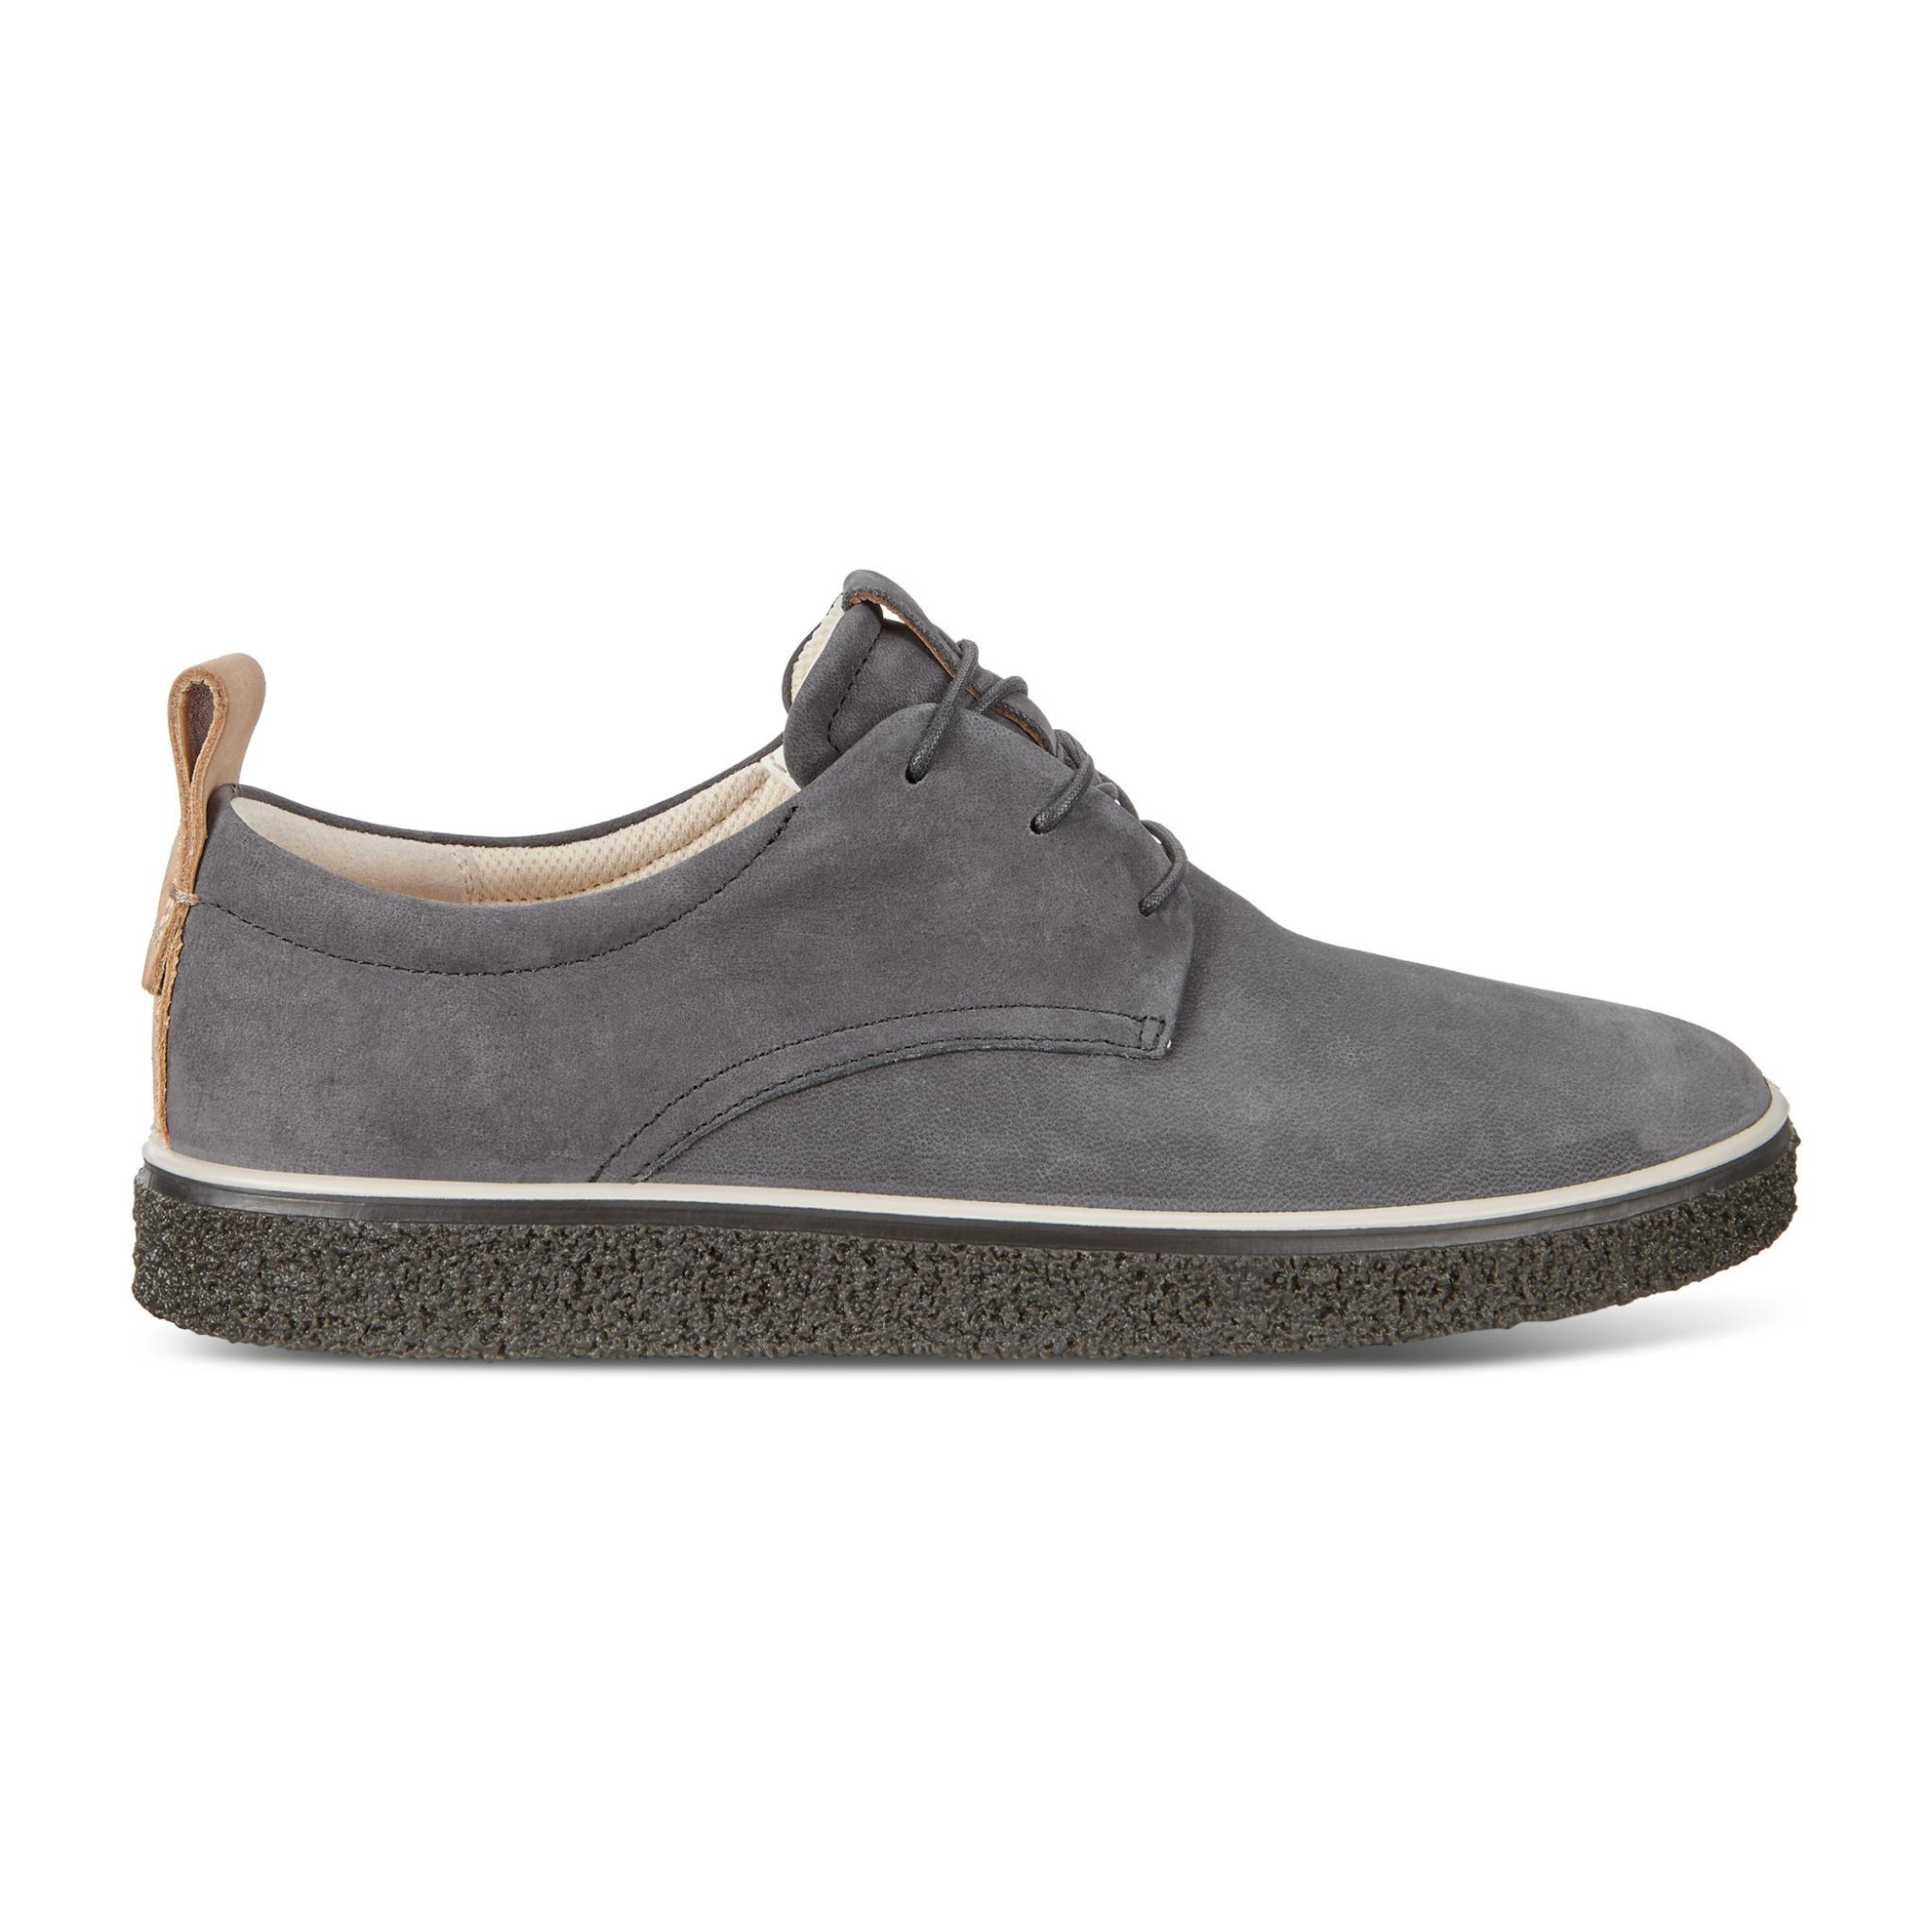 Ecco Mens Derby 45 - Products - Veryk Mall - Veryk Mall, many product, quick response, safe money!